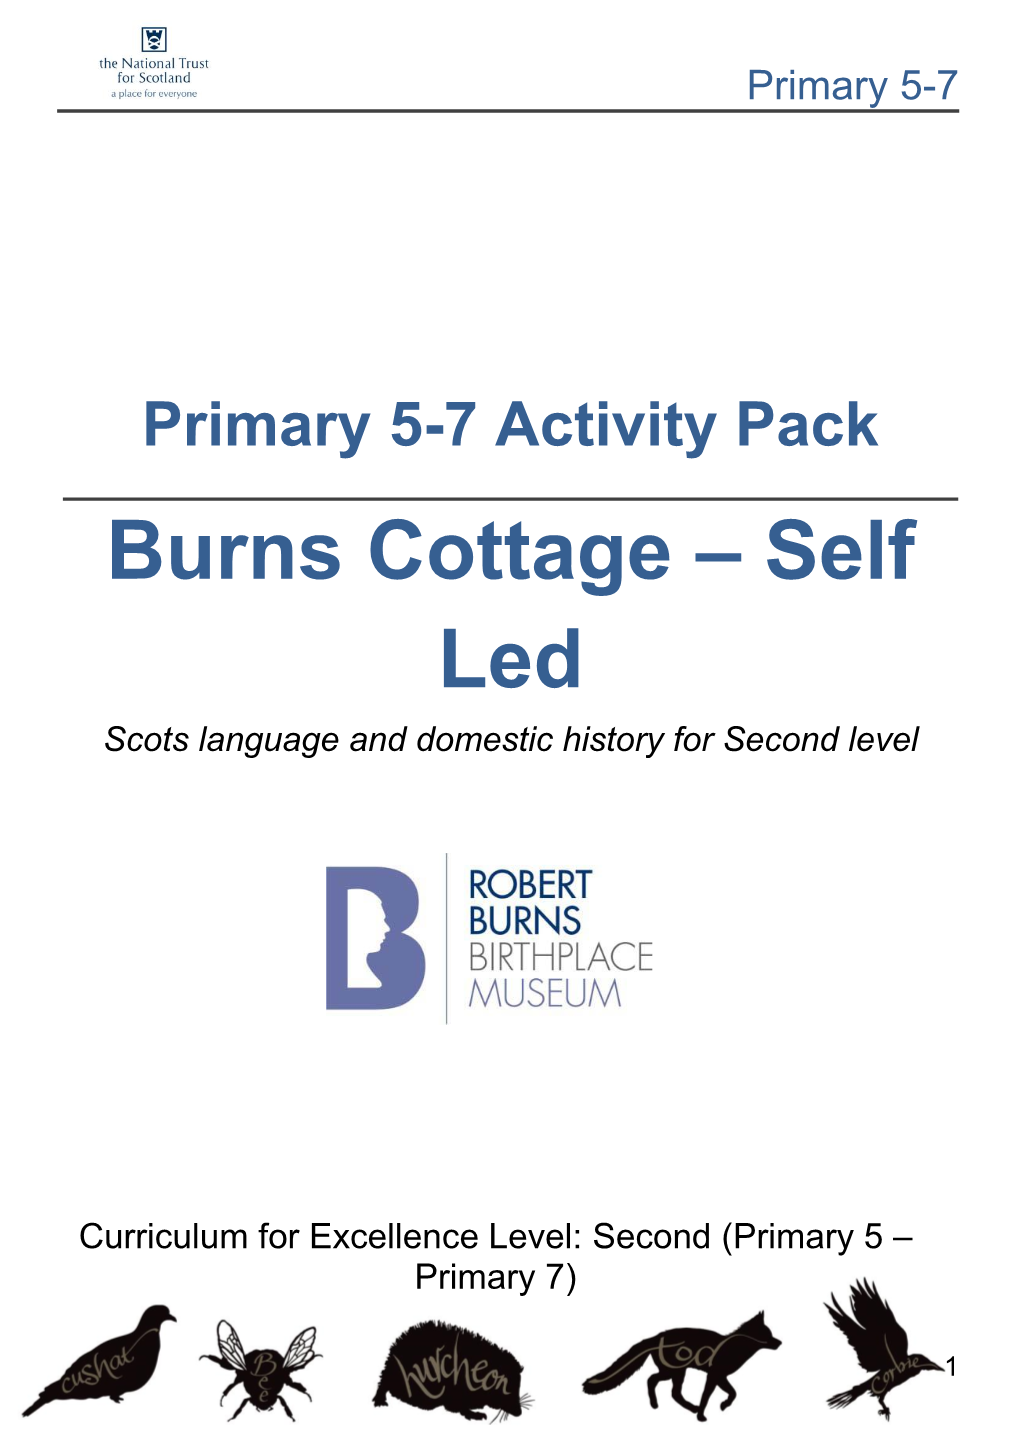 Burns Cottage – Self Led Scots Language and Domestic History for Second Level